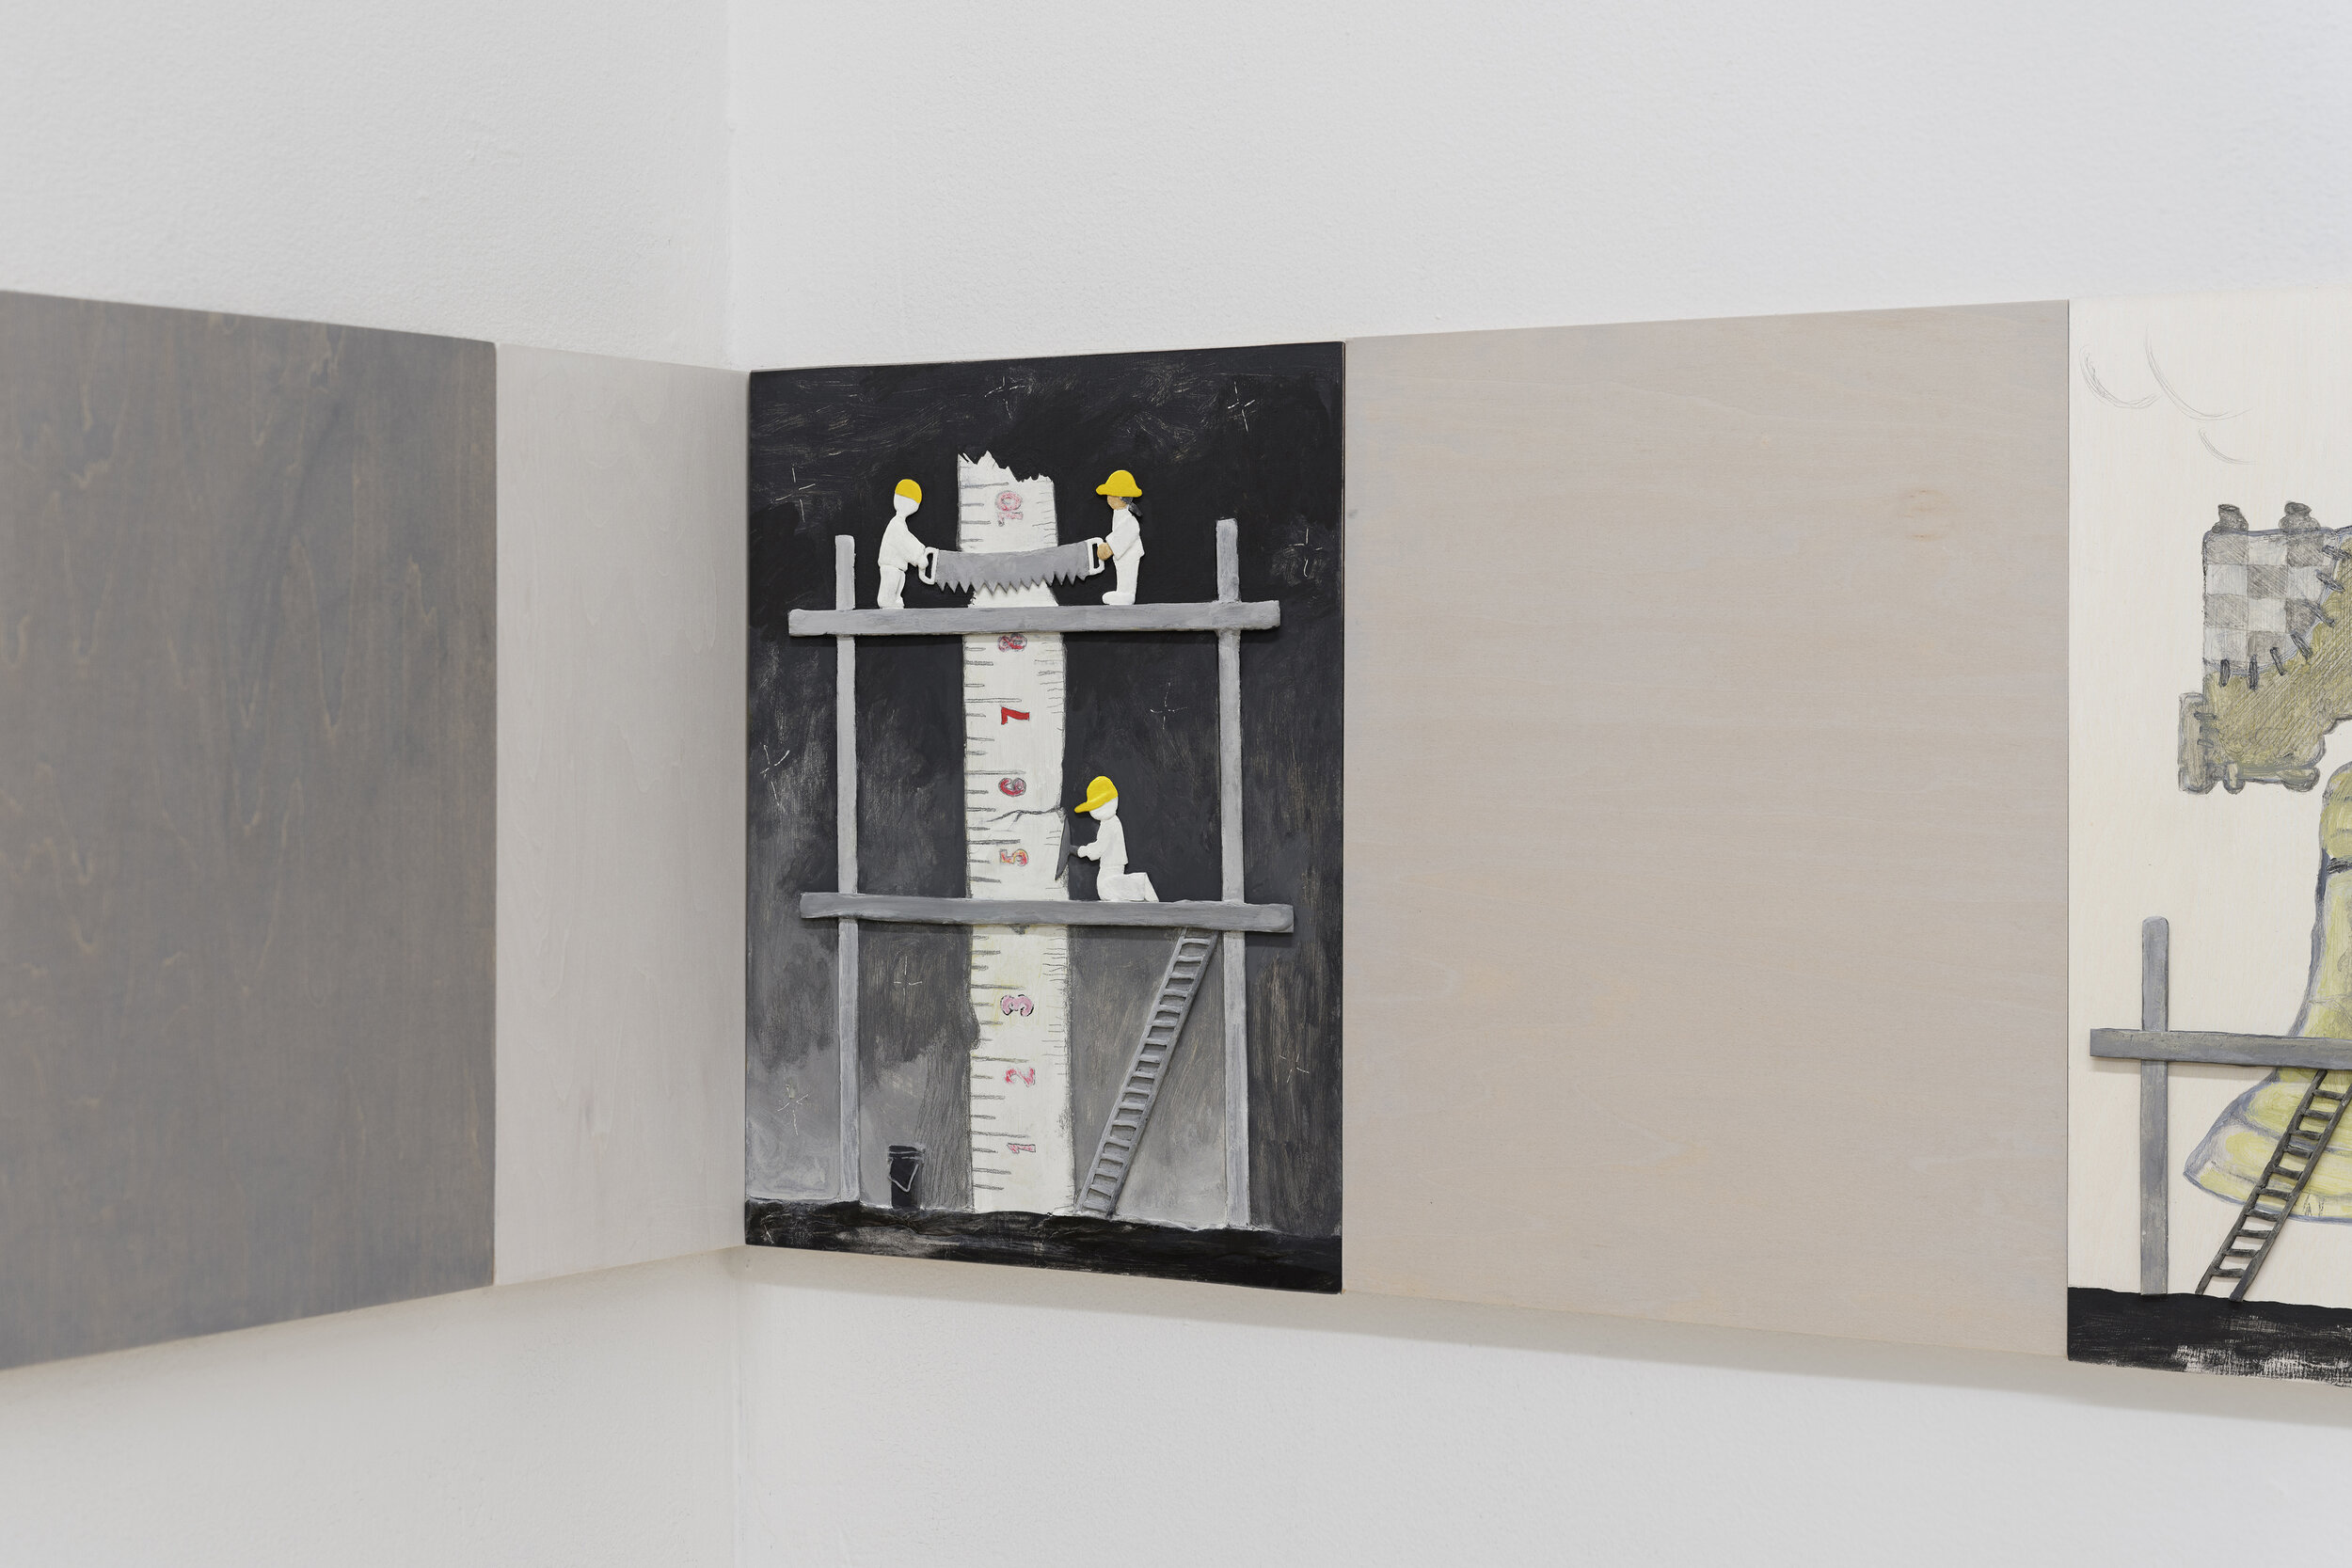  Dennis Witkin  Repairing Ruler,  2020 Oil paint, acrylic paint, cal-tint, wood-stain, charcoal, graphite, epoxy clay, polymer clay on panel 14 x 11 inches 